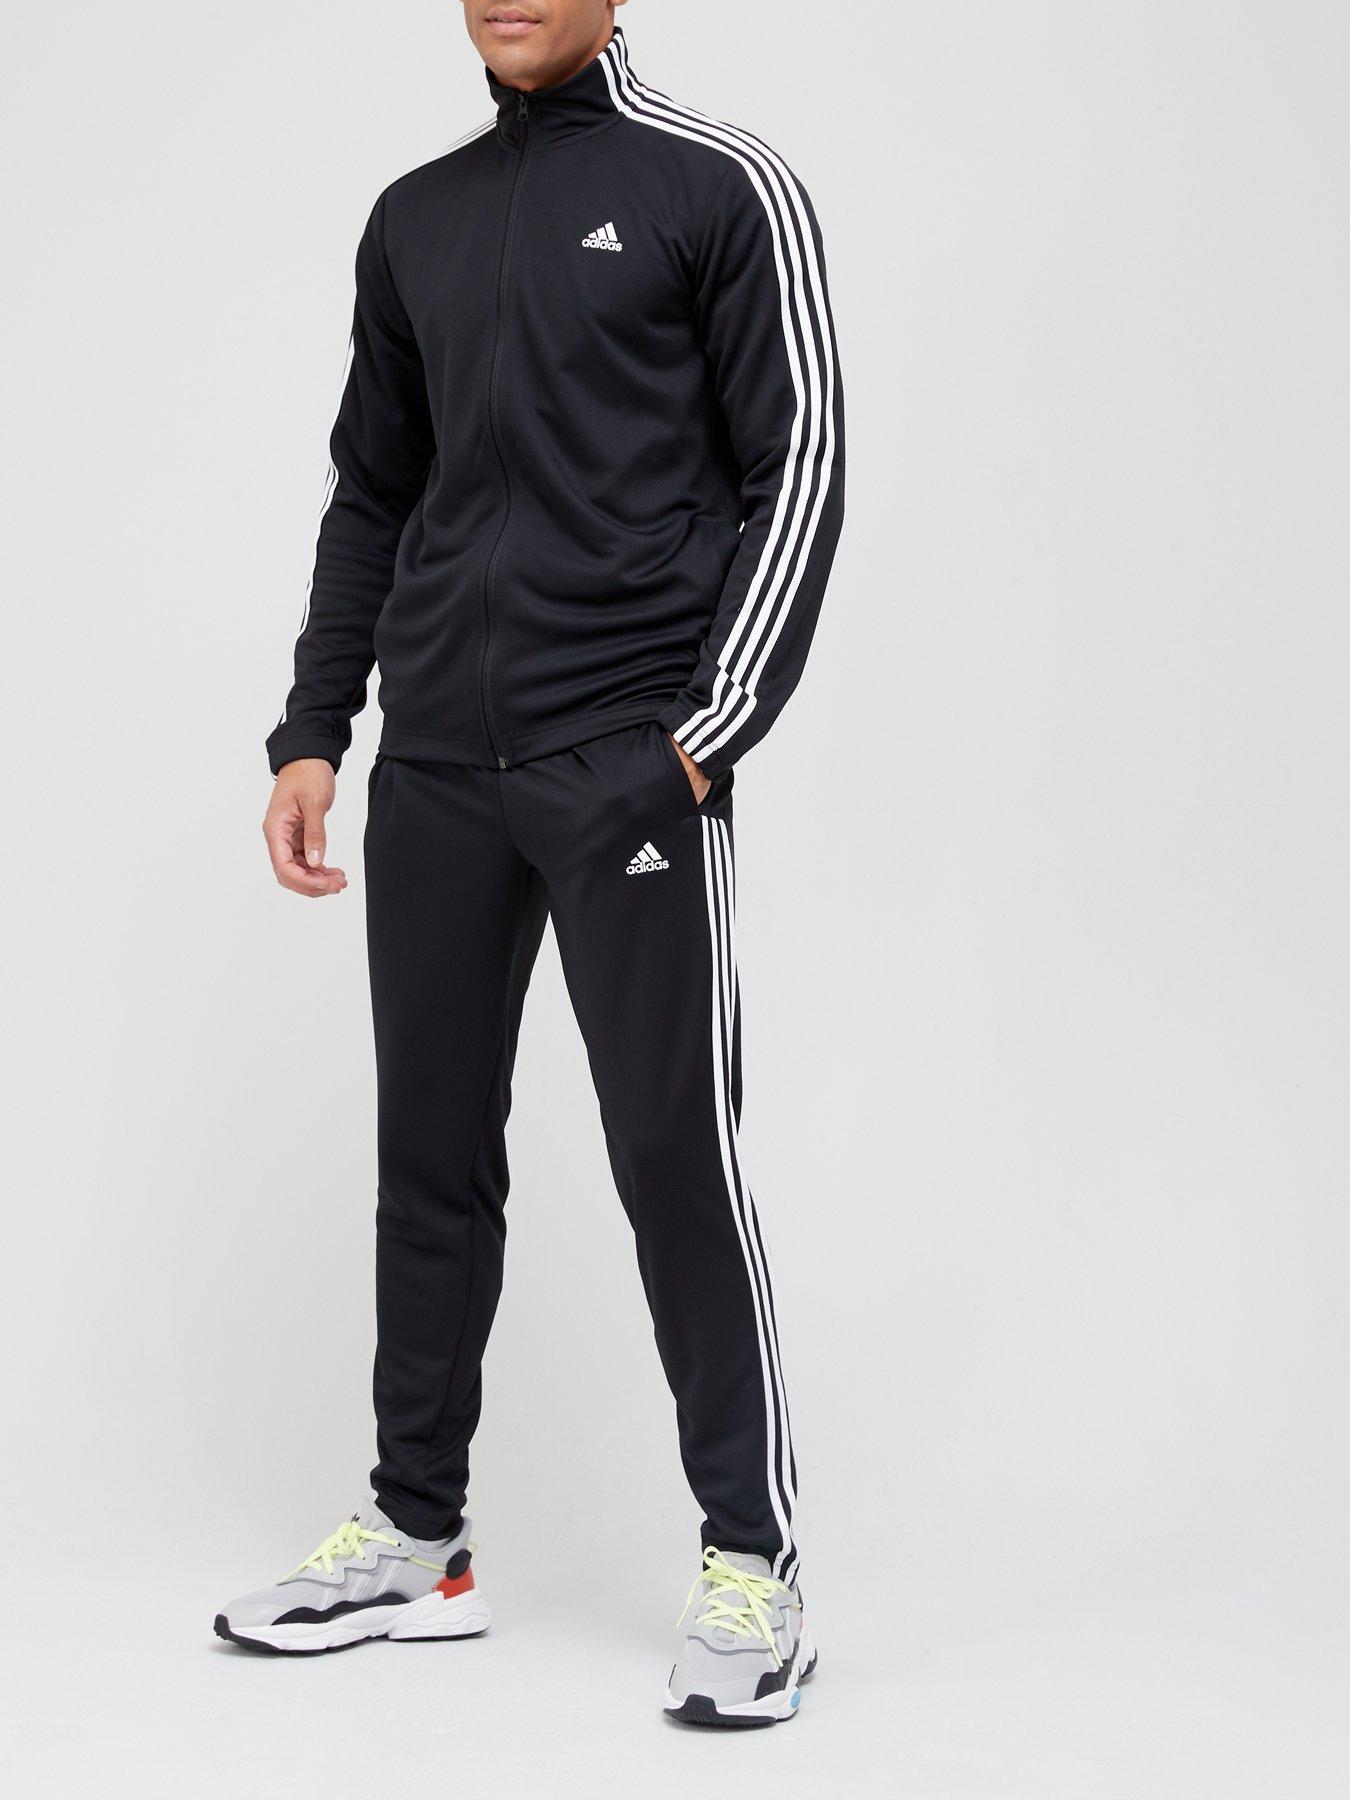 adidas MTS Doubleknit Tapered Tracksuit Black/White very.co.uk